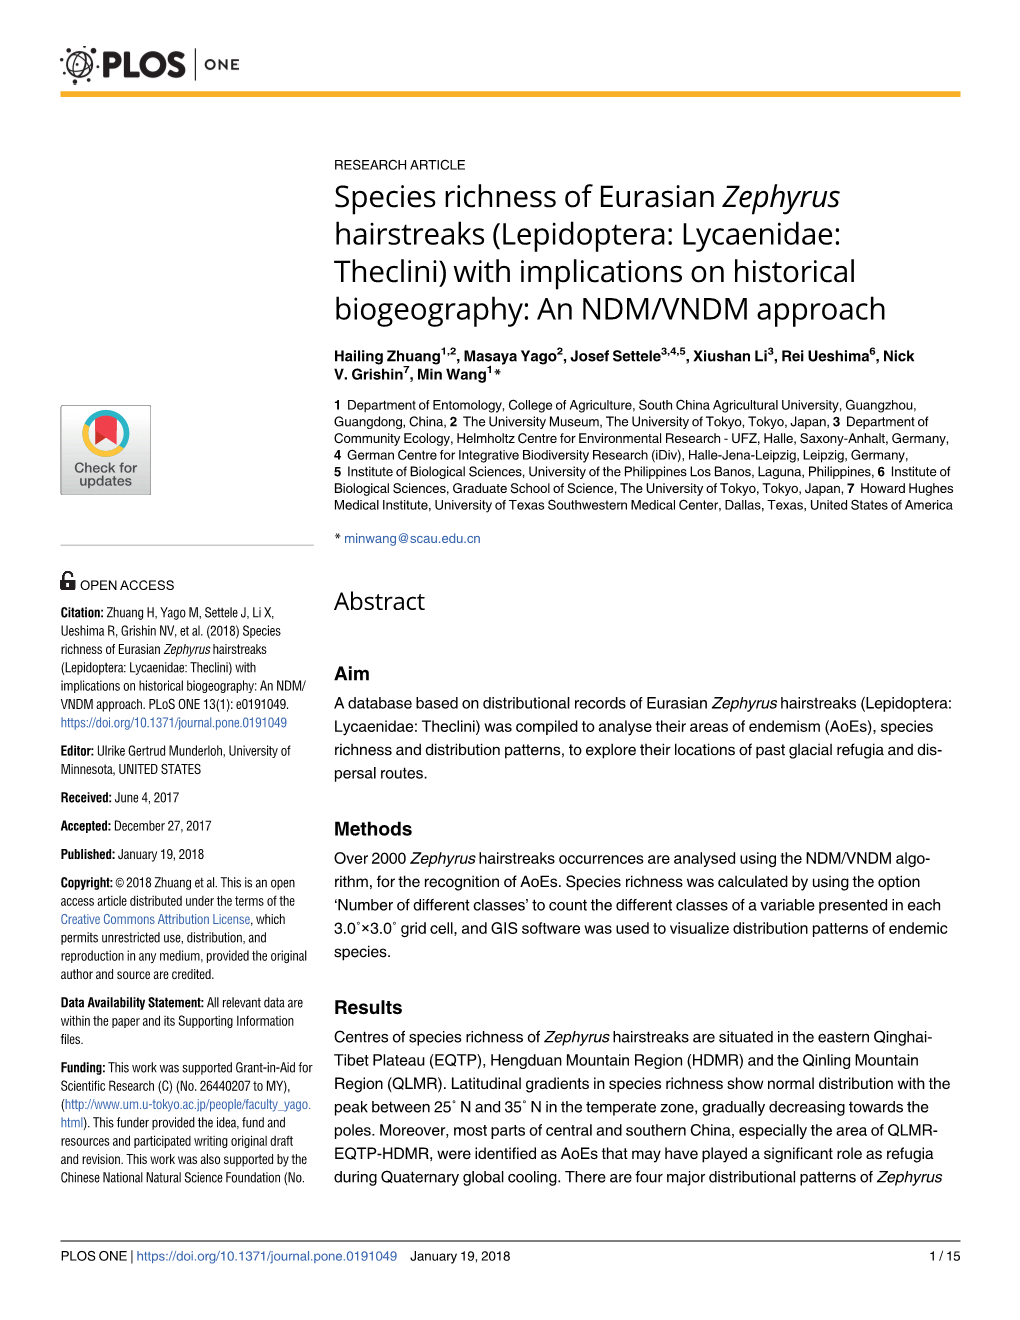 Species Richness of Eurasian Zephyrus Hairstreaks (Lepidoptera: Lycaenidae: Theclini) with Implications on Historical Biogeography: an NDM/VNDM Approach